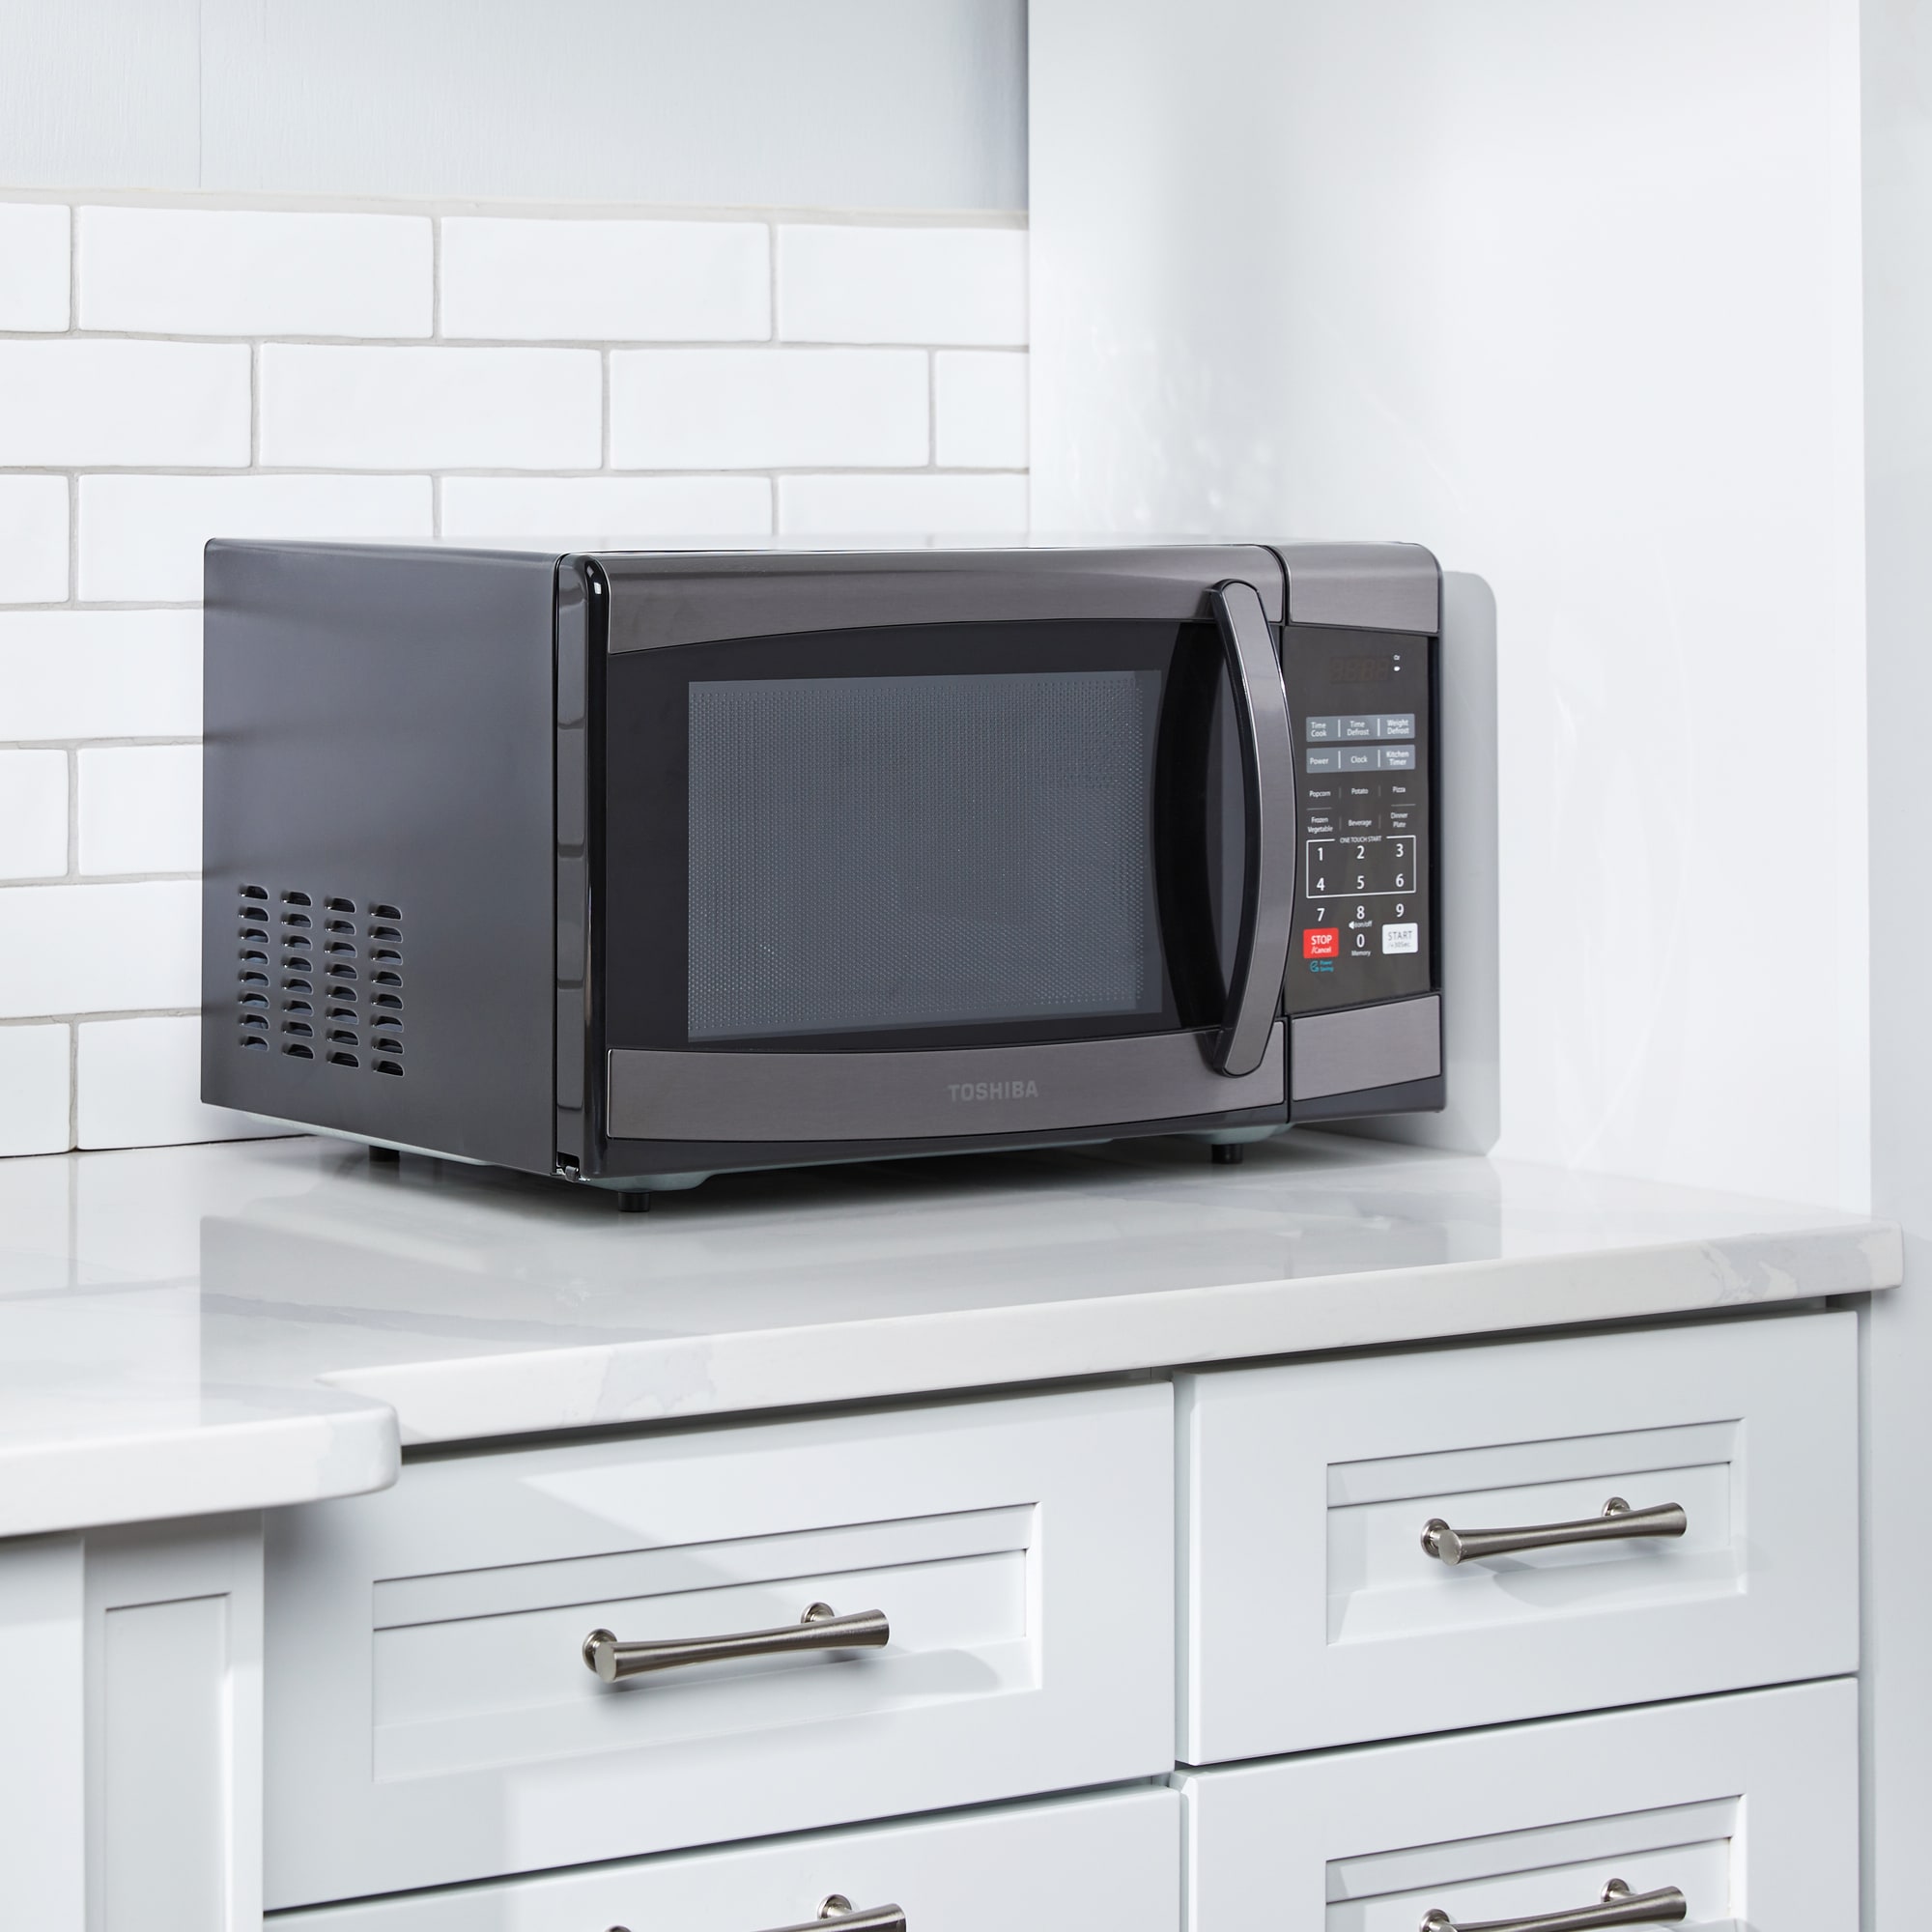 Toshiba 0.9 Cubic Feet Convection Countertop Microwave with Air Frying  Capability & Reviews